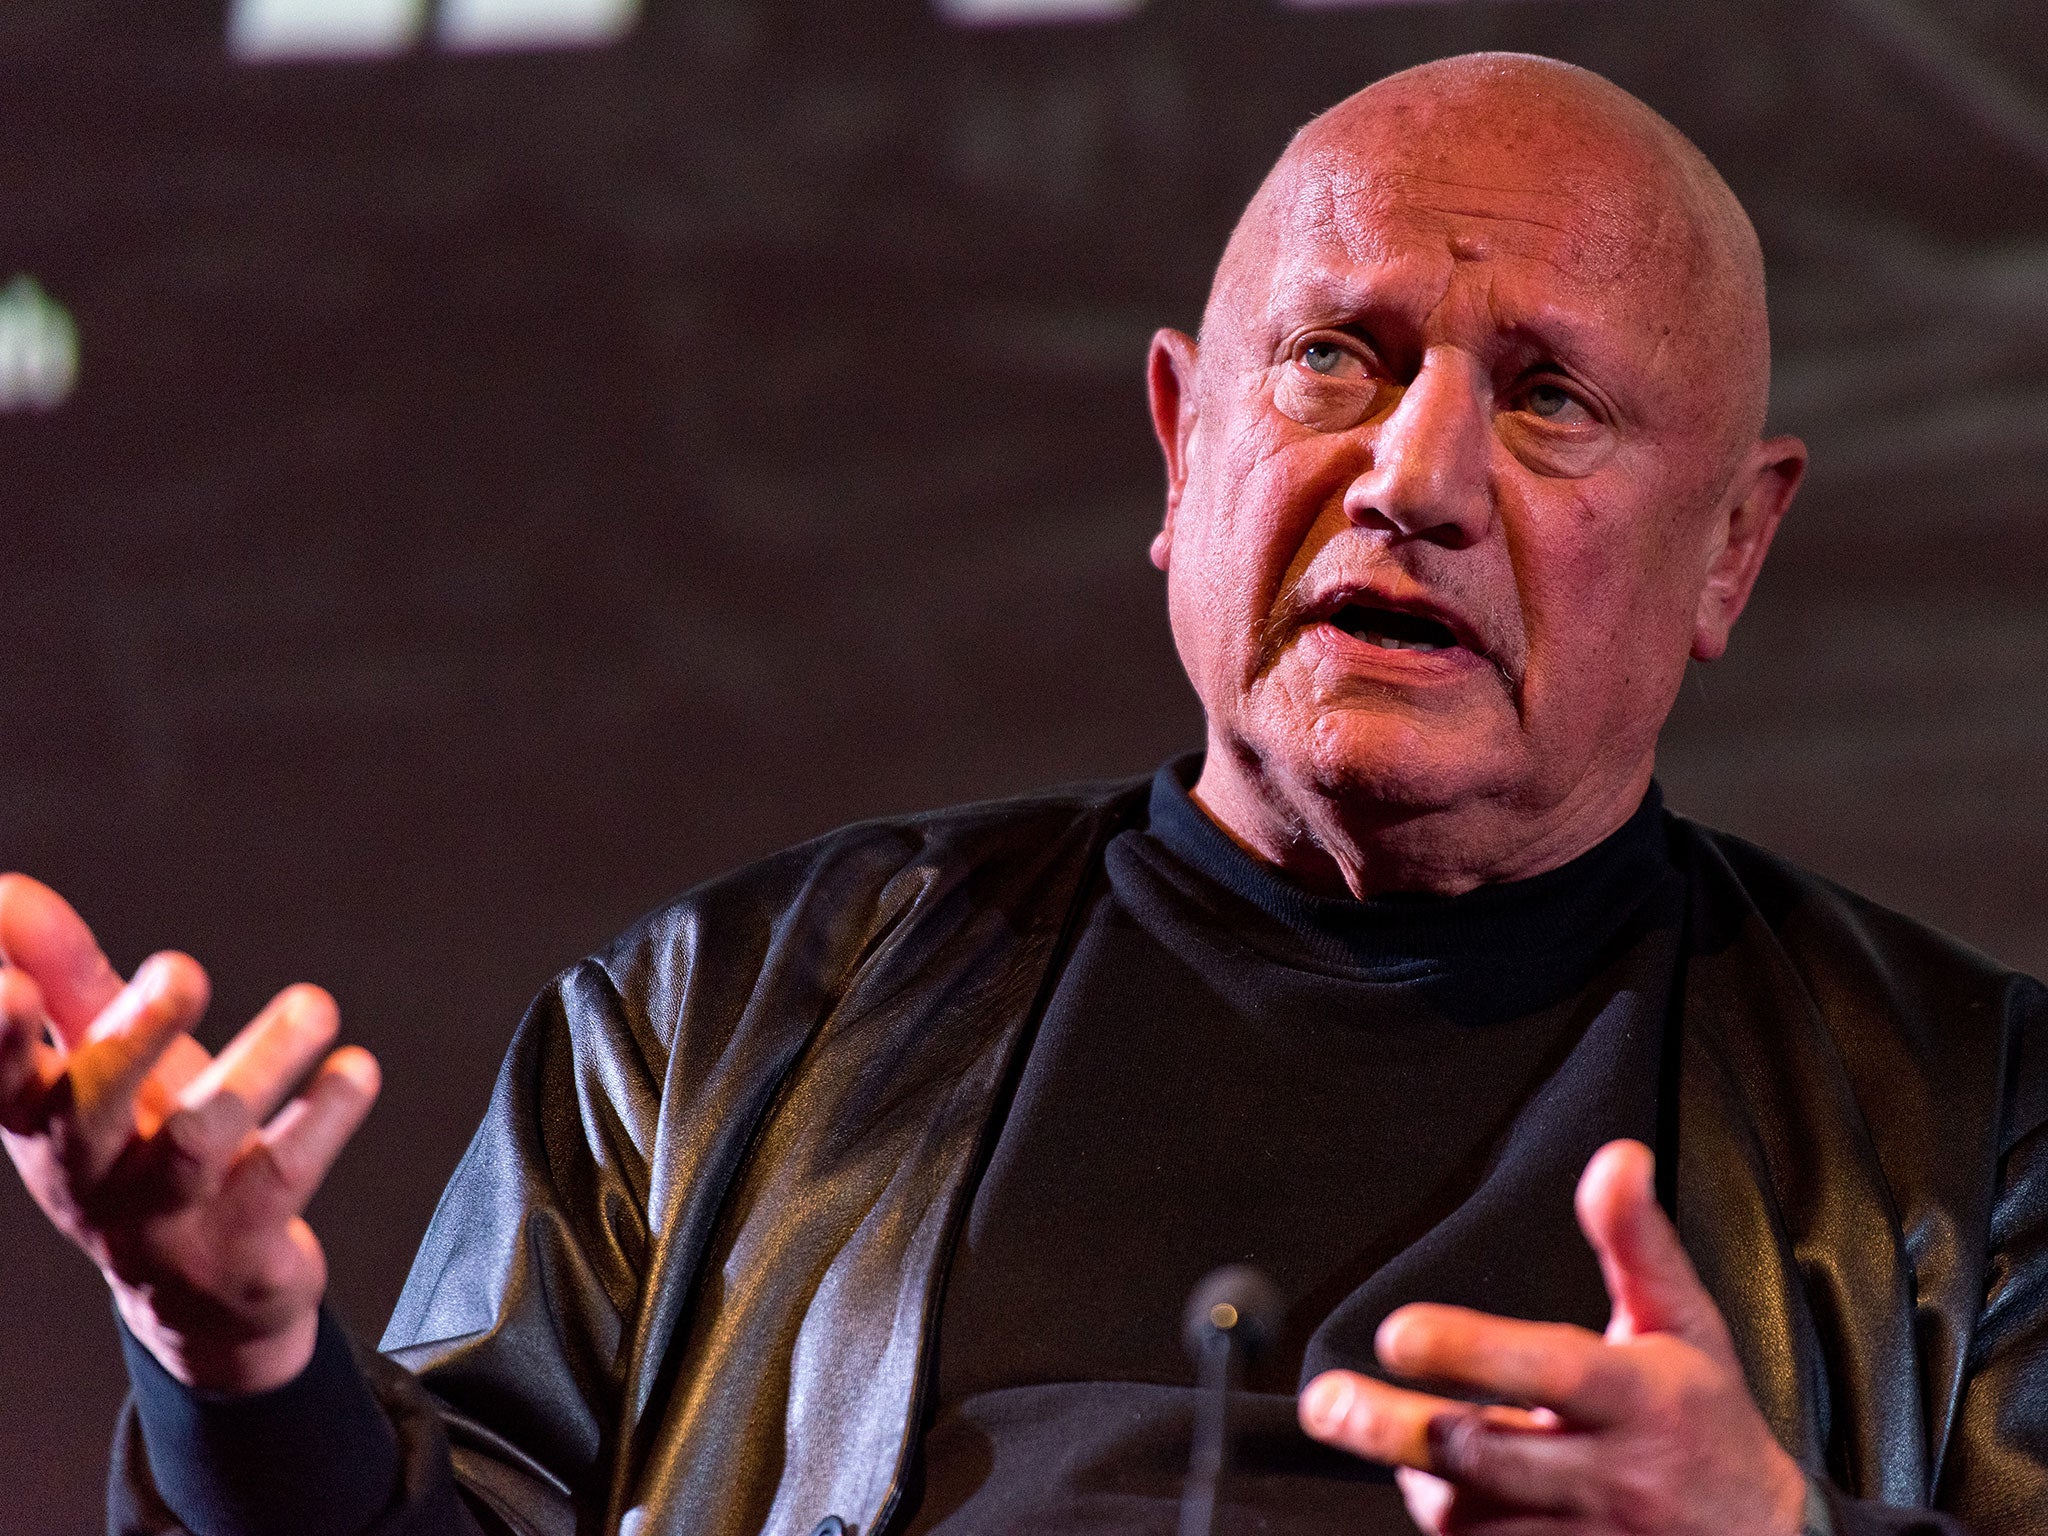 Steven Berkoff has stirred controversy with his views before